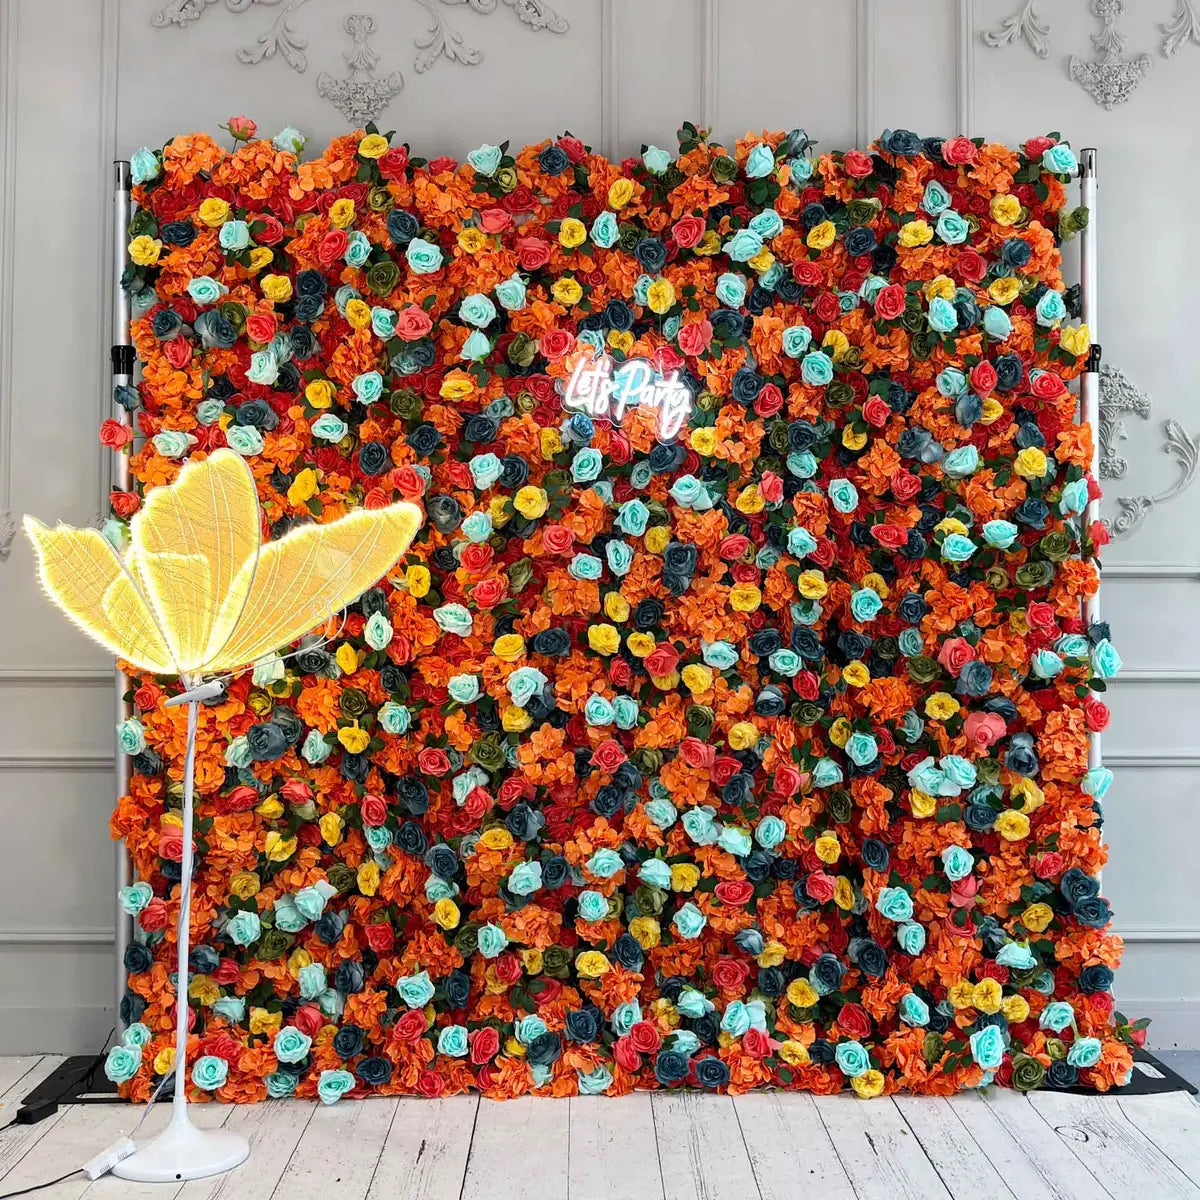 Flower Wall 3D Orange & Blue Rolling Up Curtain Floral Backdrop Wedding Party Proposal Decor